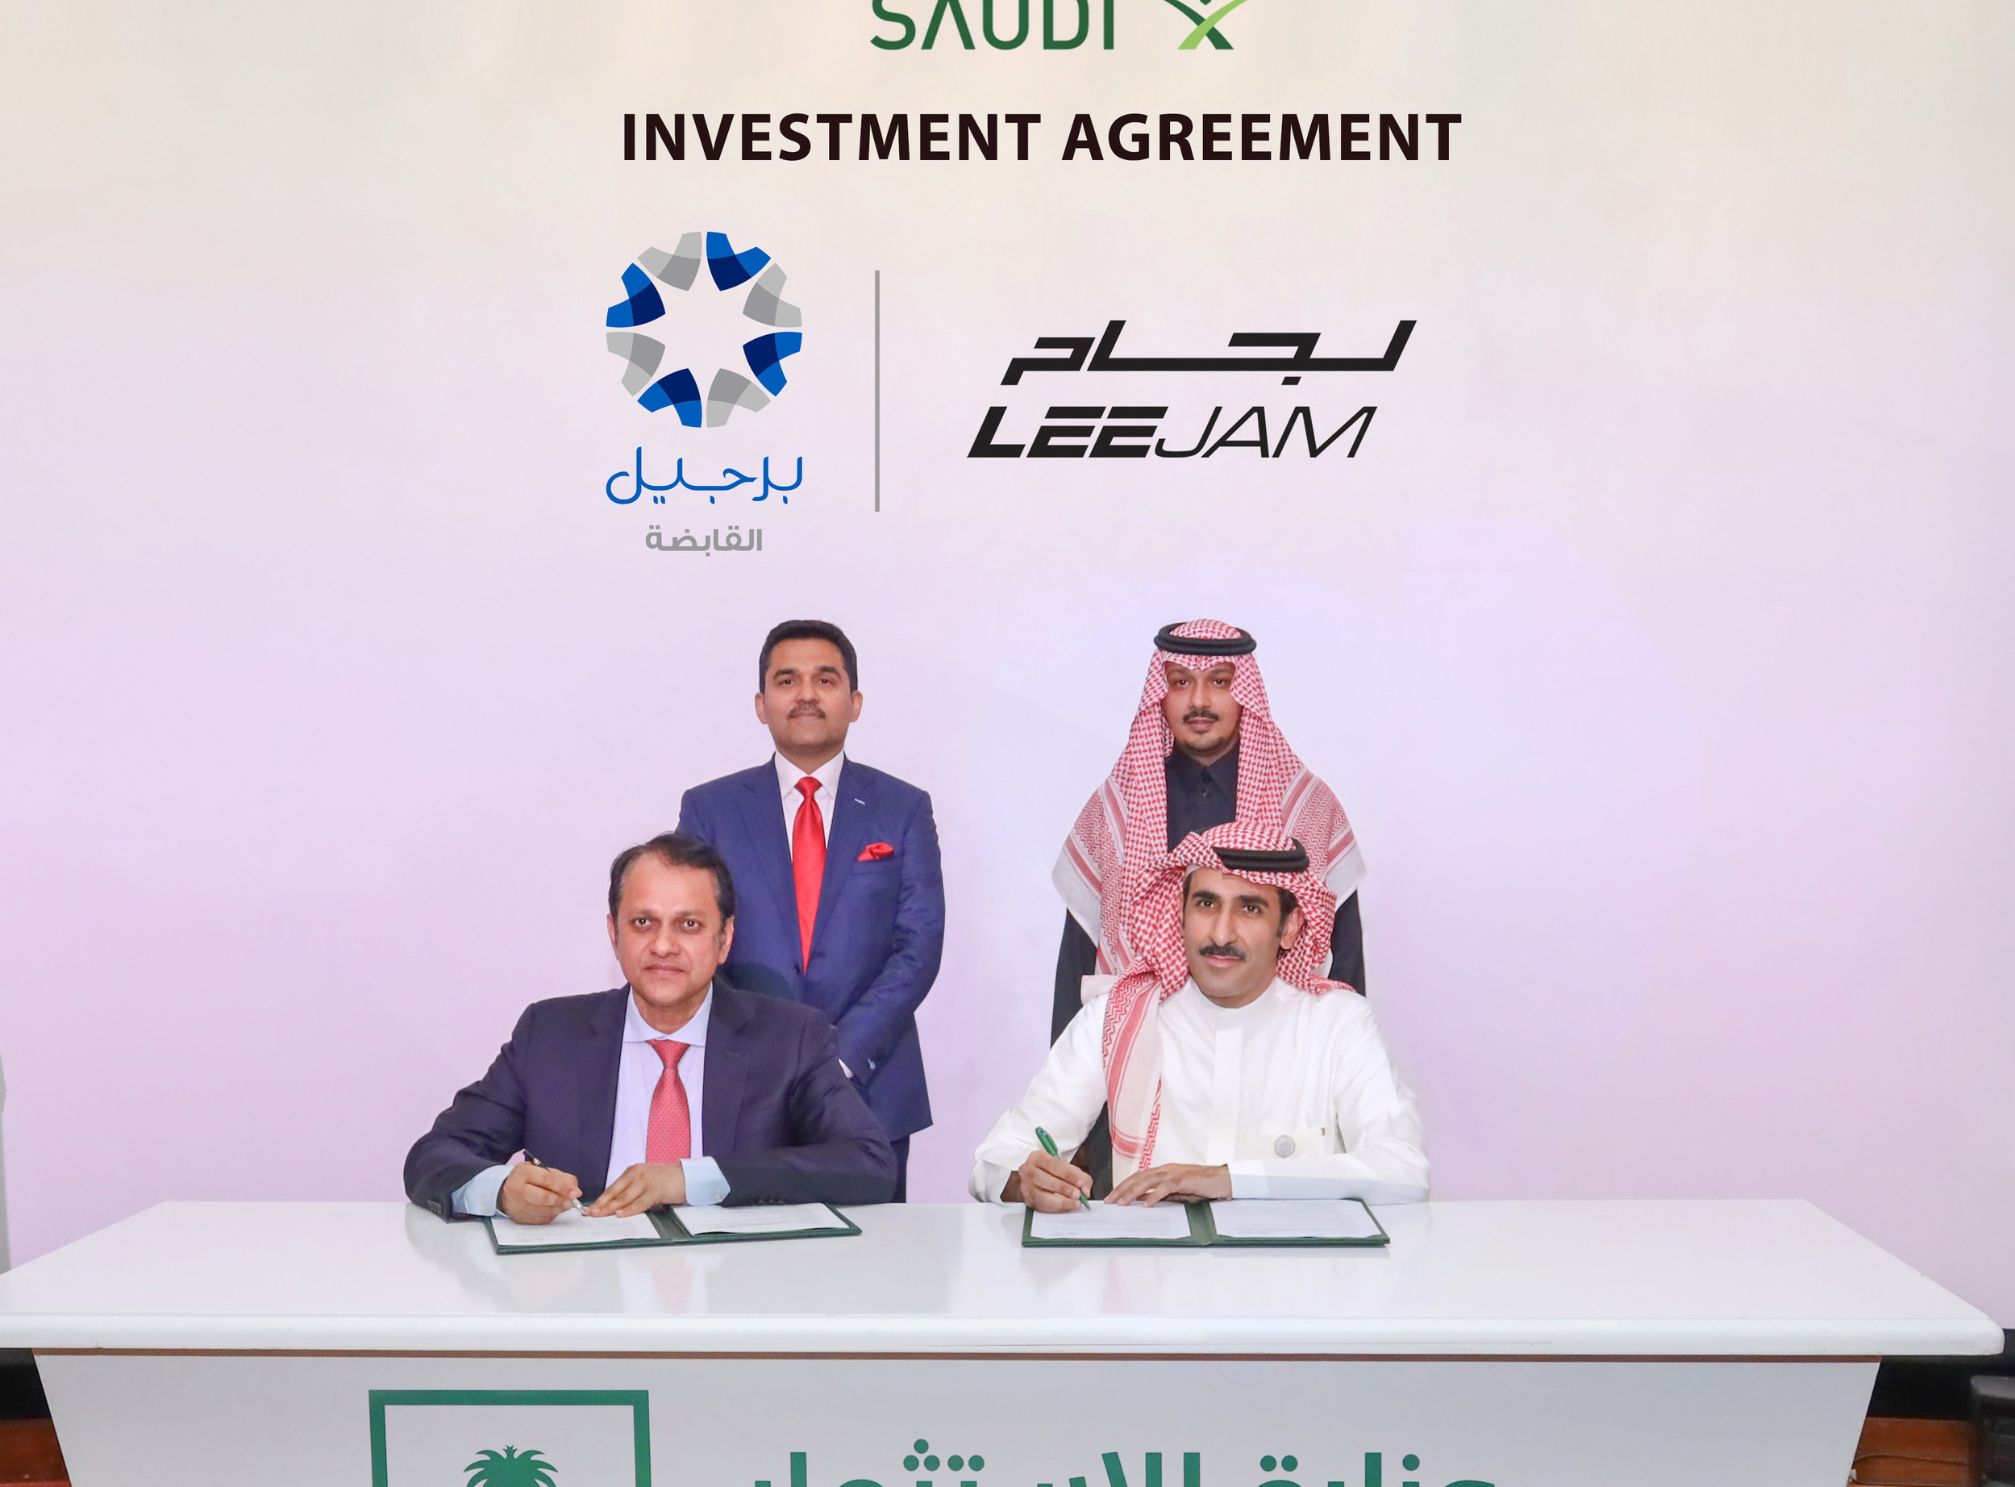 Burjeel Holdings announces creation of new joint venture with Leejam, marking its entry into the Kingdom of Saudi Arabia